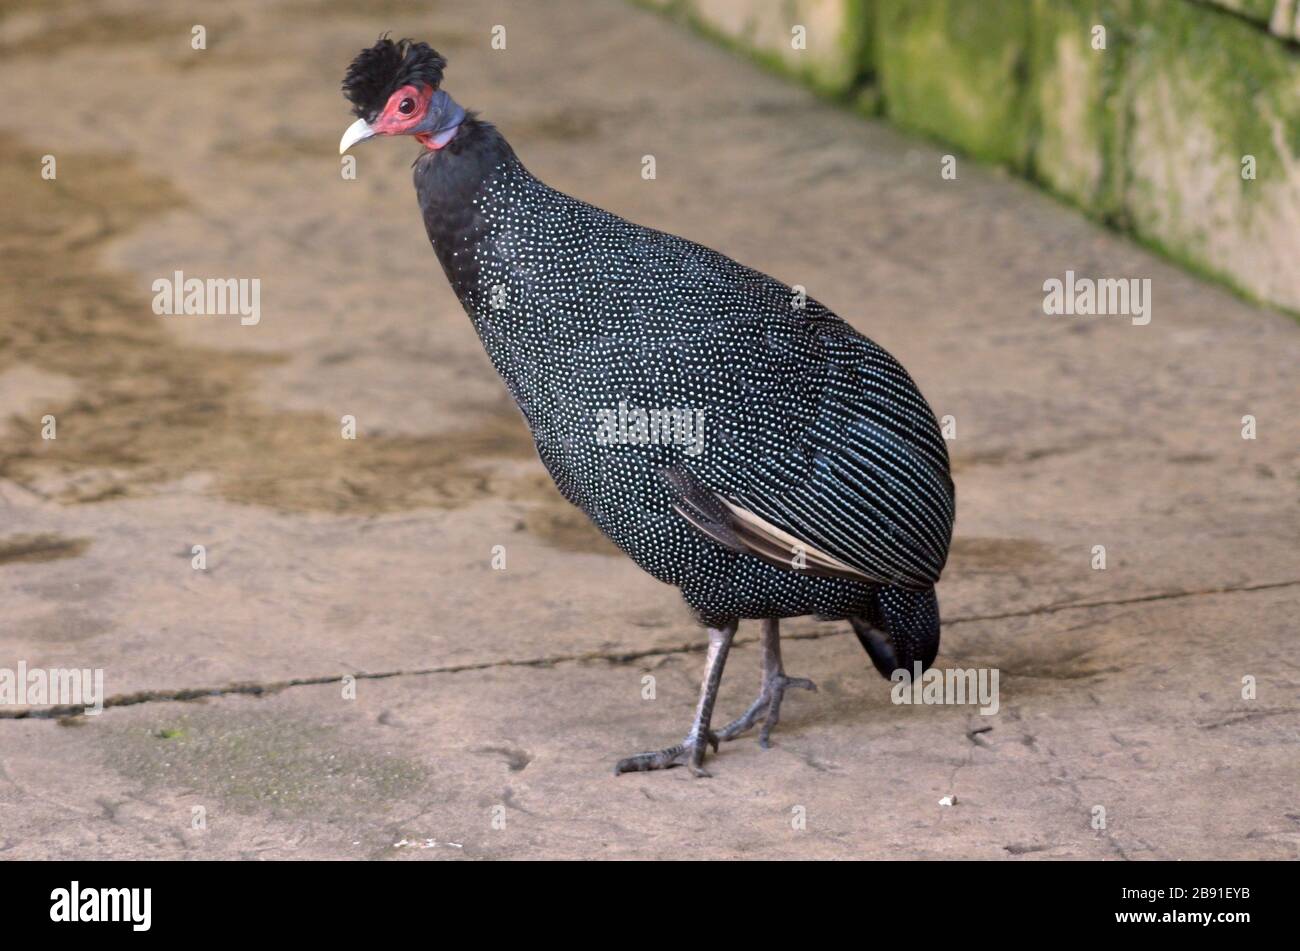 Crested Guineafowl, southern africa, close-up Stock Photo